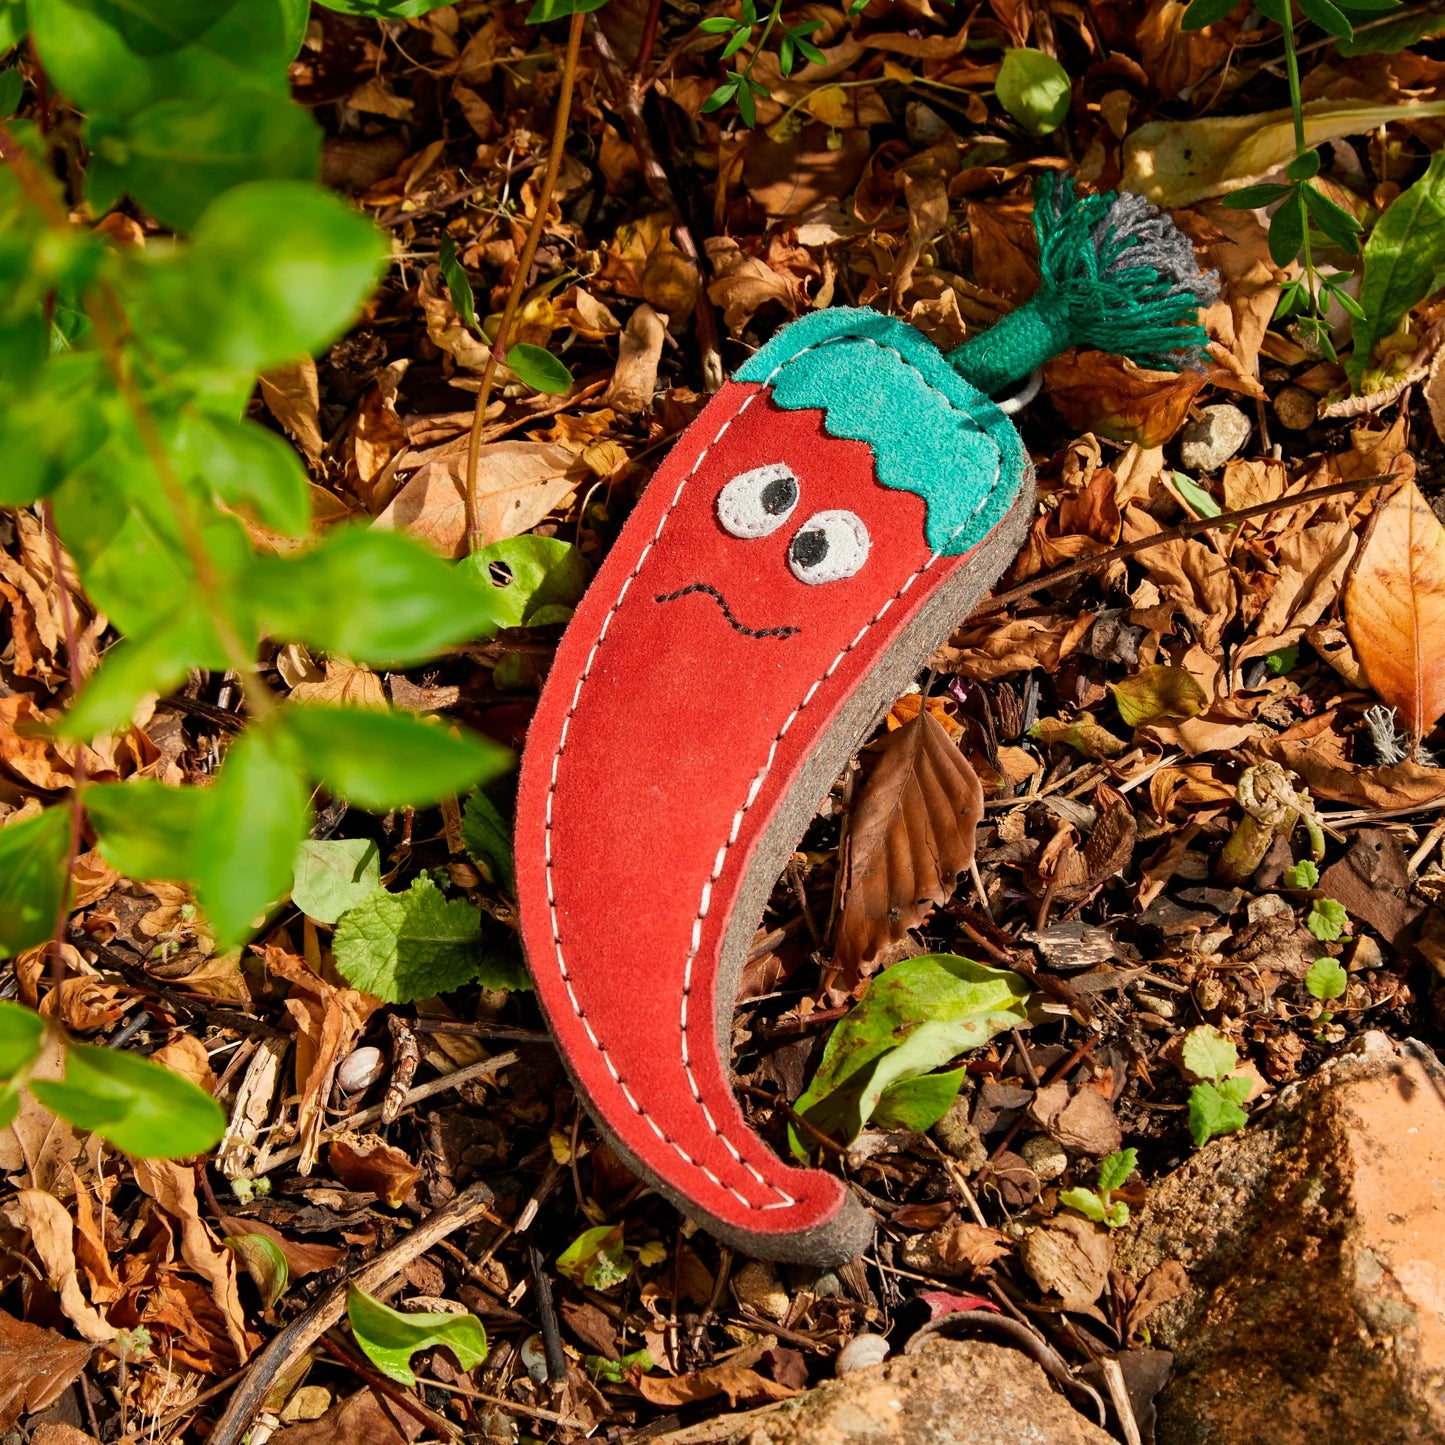 Chad the Red Hot Chilli Pepper, Eco Toy